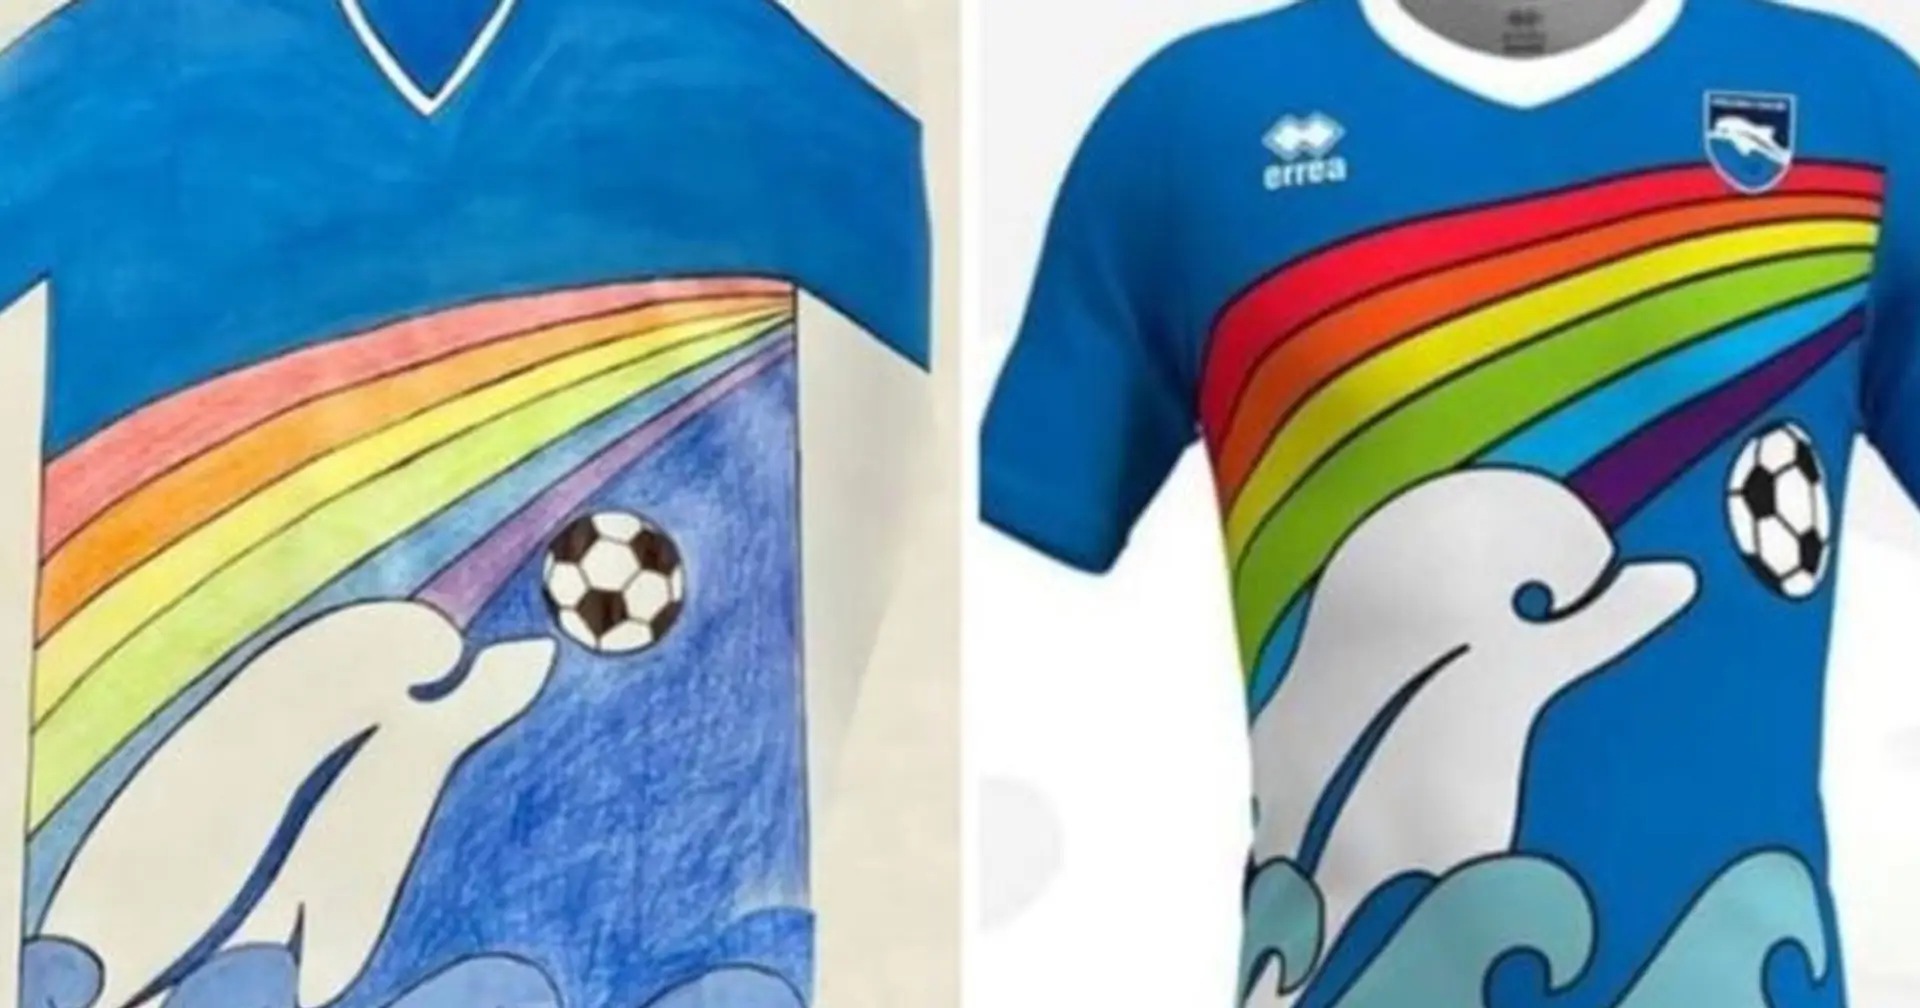 Serie B side Pescara adopt 6-year-old fan's kit design for next season after running a competition under the motto 'give a kick to Covid-19'